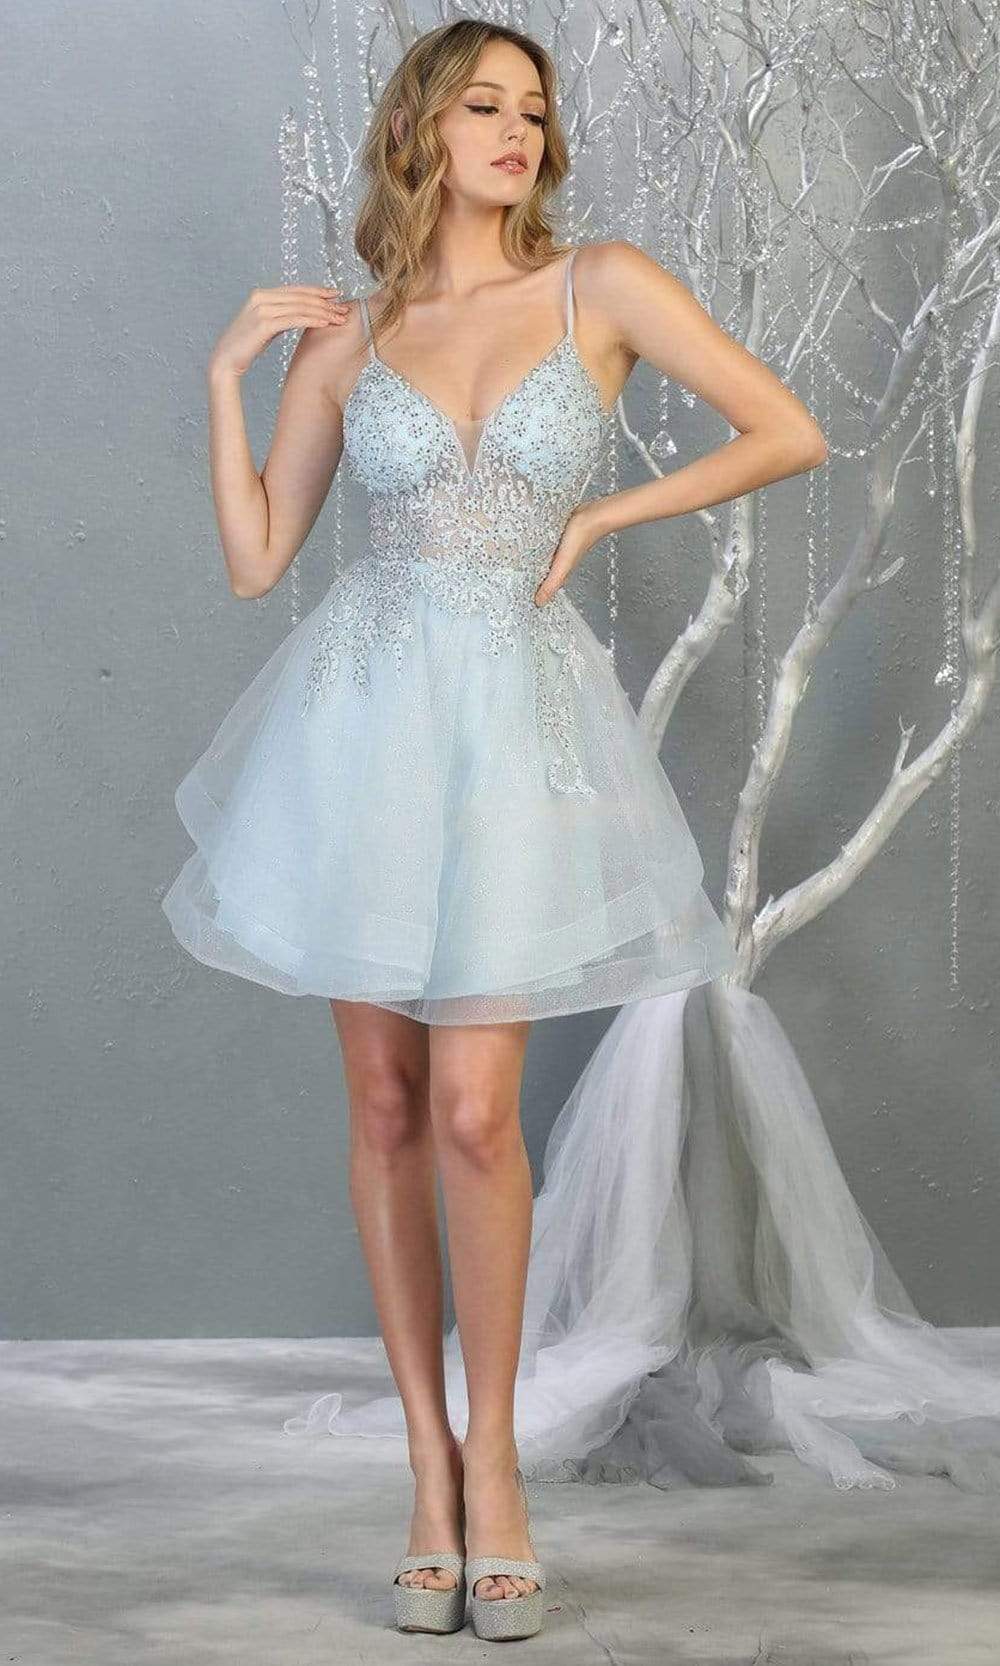 May Queen - MQ1816 Beaded Embellished Tiered Tulle Cocktail Dress Homecoming Dresses 2 / Baby-Blue